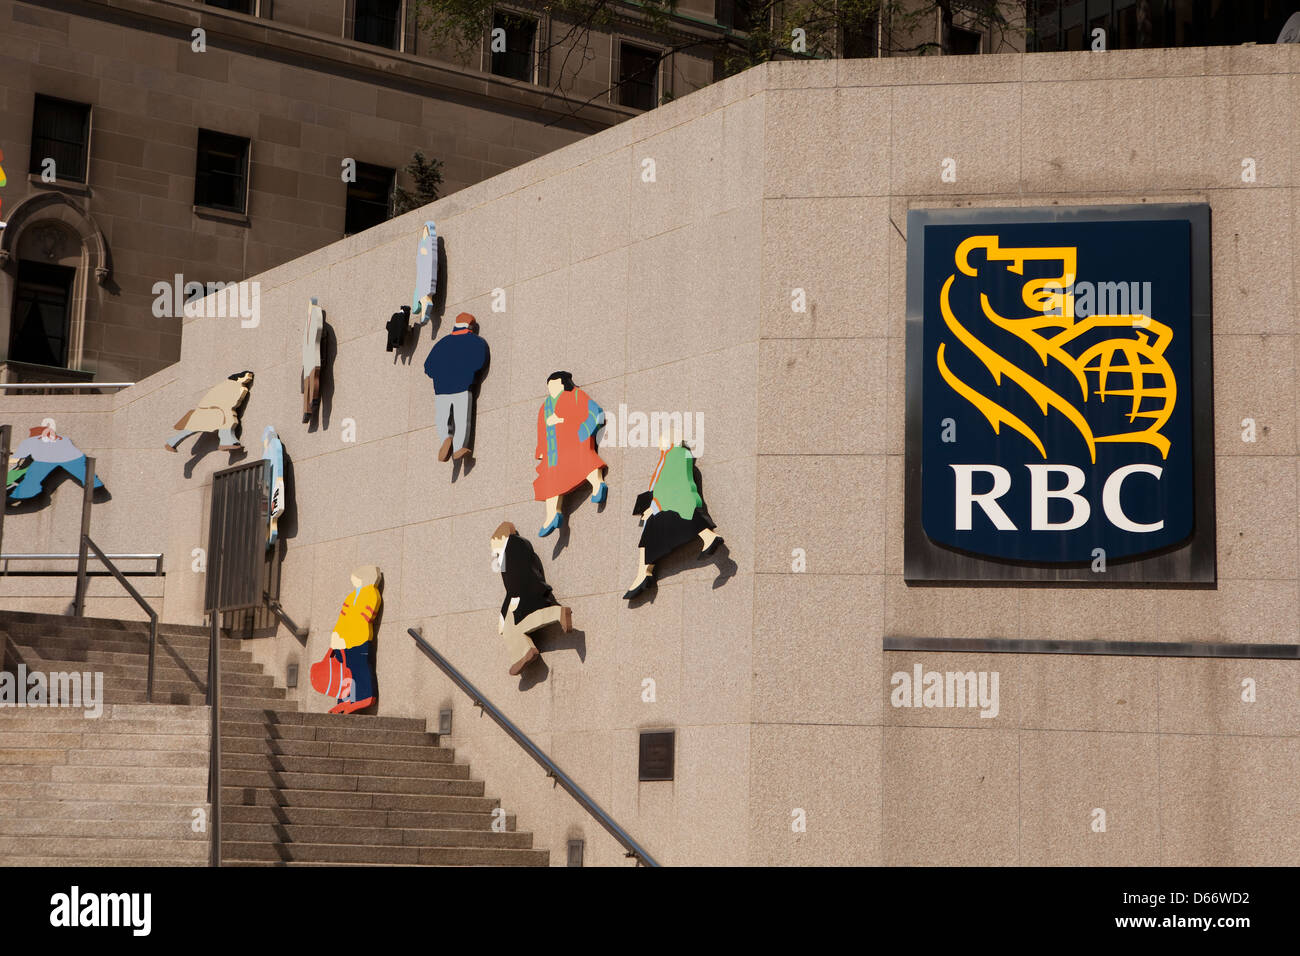 A view of the Royal Bank of Canada's building in downtown Toronto, Canada Stock Photo